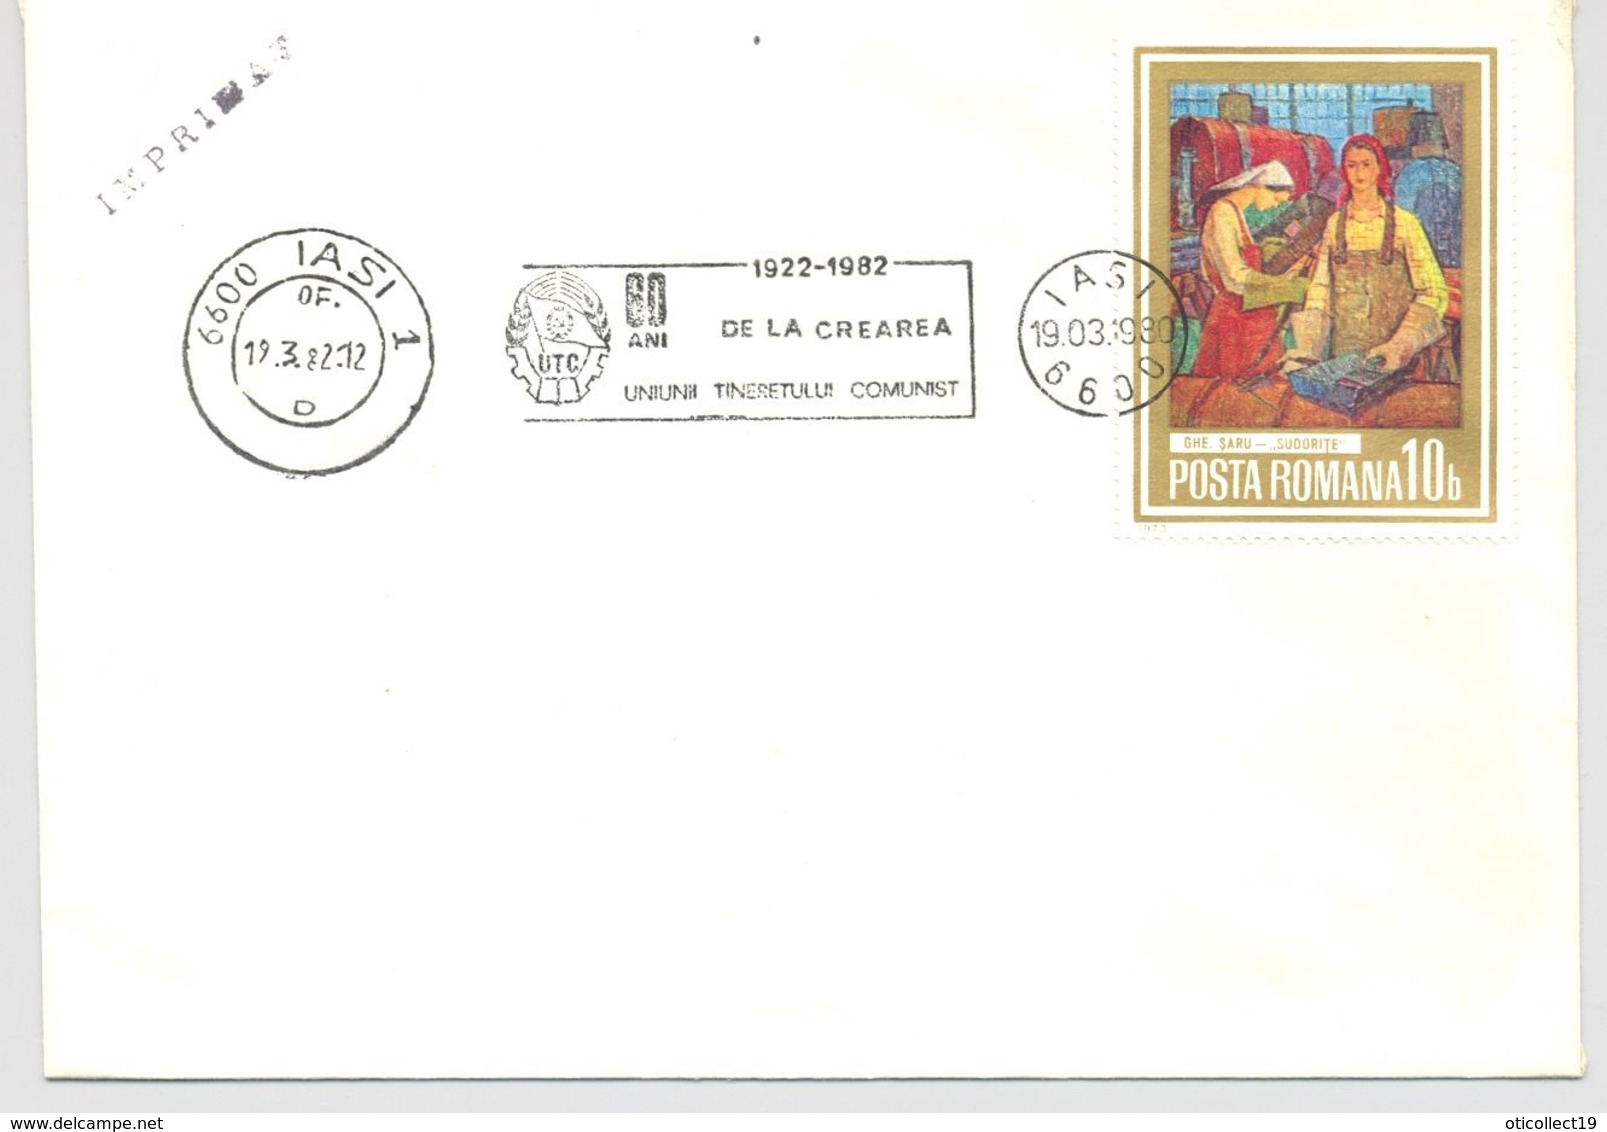 ROMANIAN YOUTH COMMUNIST ORGANIZATION ANNIVERSARY, SPECIAL POSTMARK ON COVER, PAINTING STAMP, 1982, ROMANIA - Briefe U. Dokumente